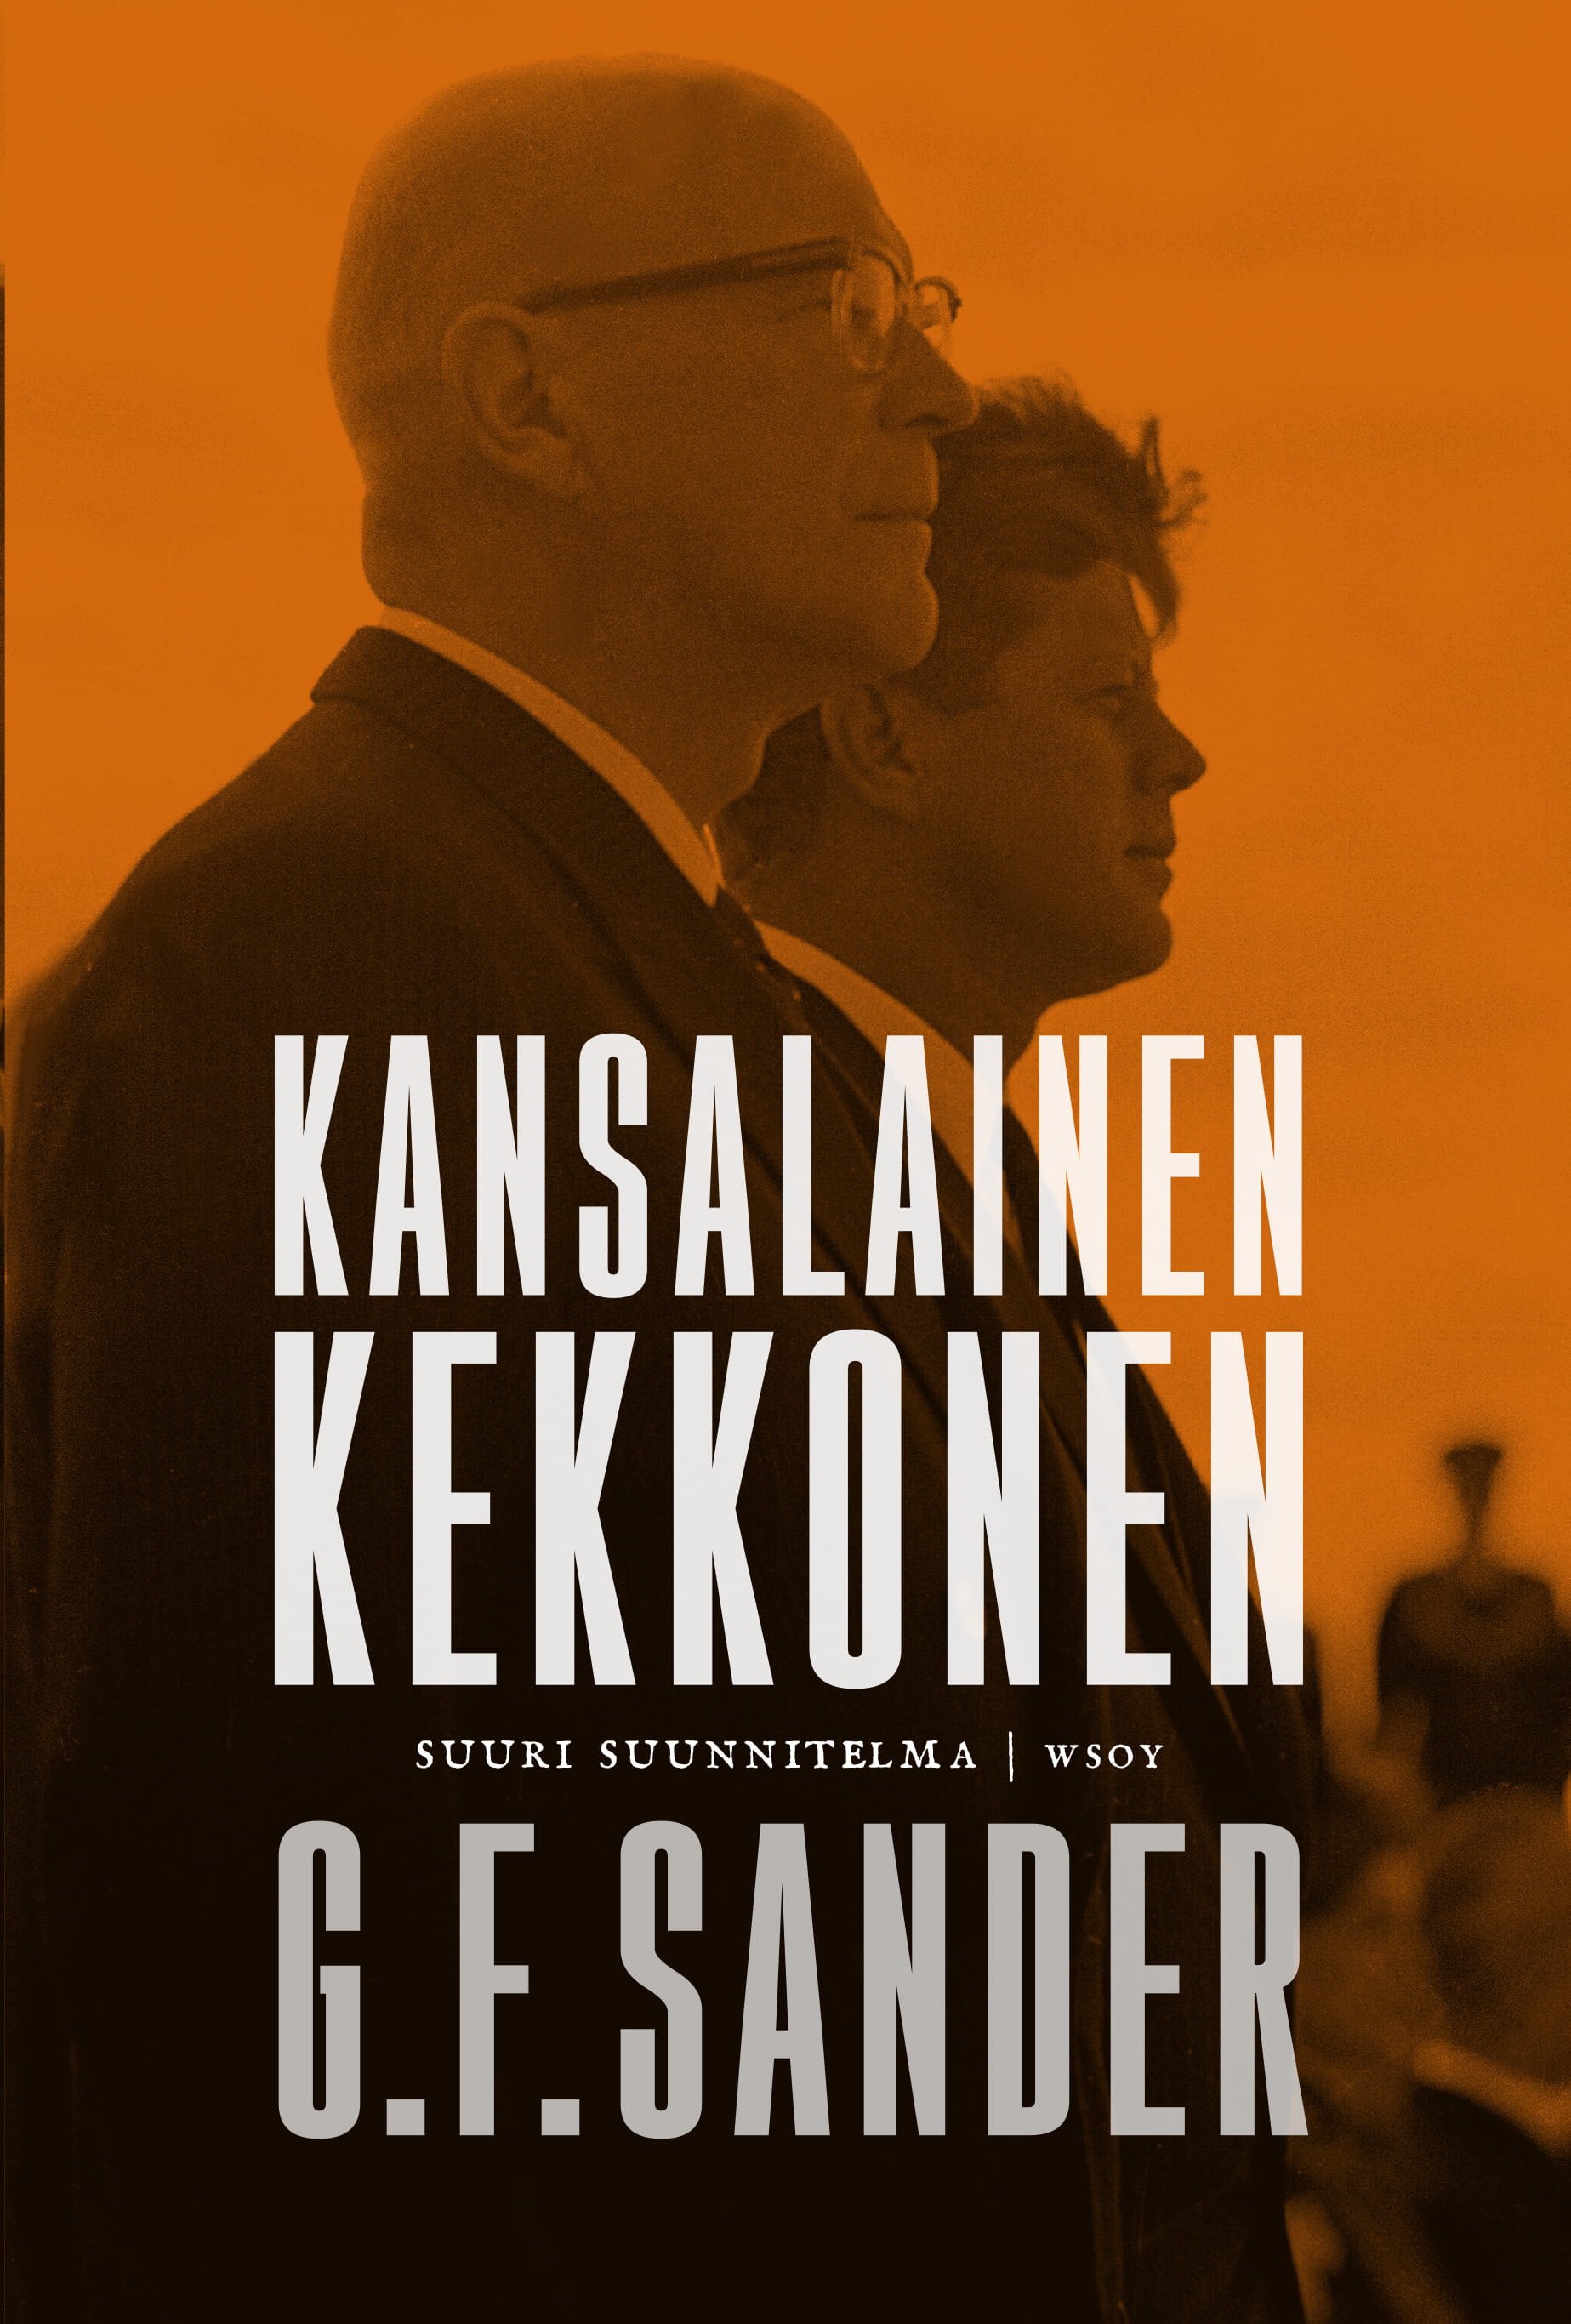 The Note Crisis: Kekkonen, Kennedy, Khrushchev and the Cold War